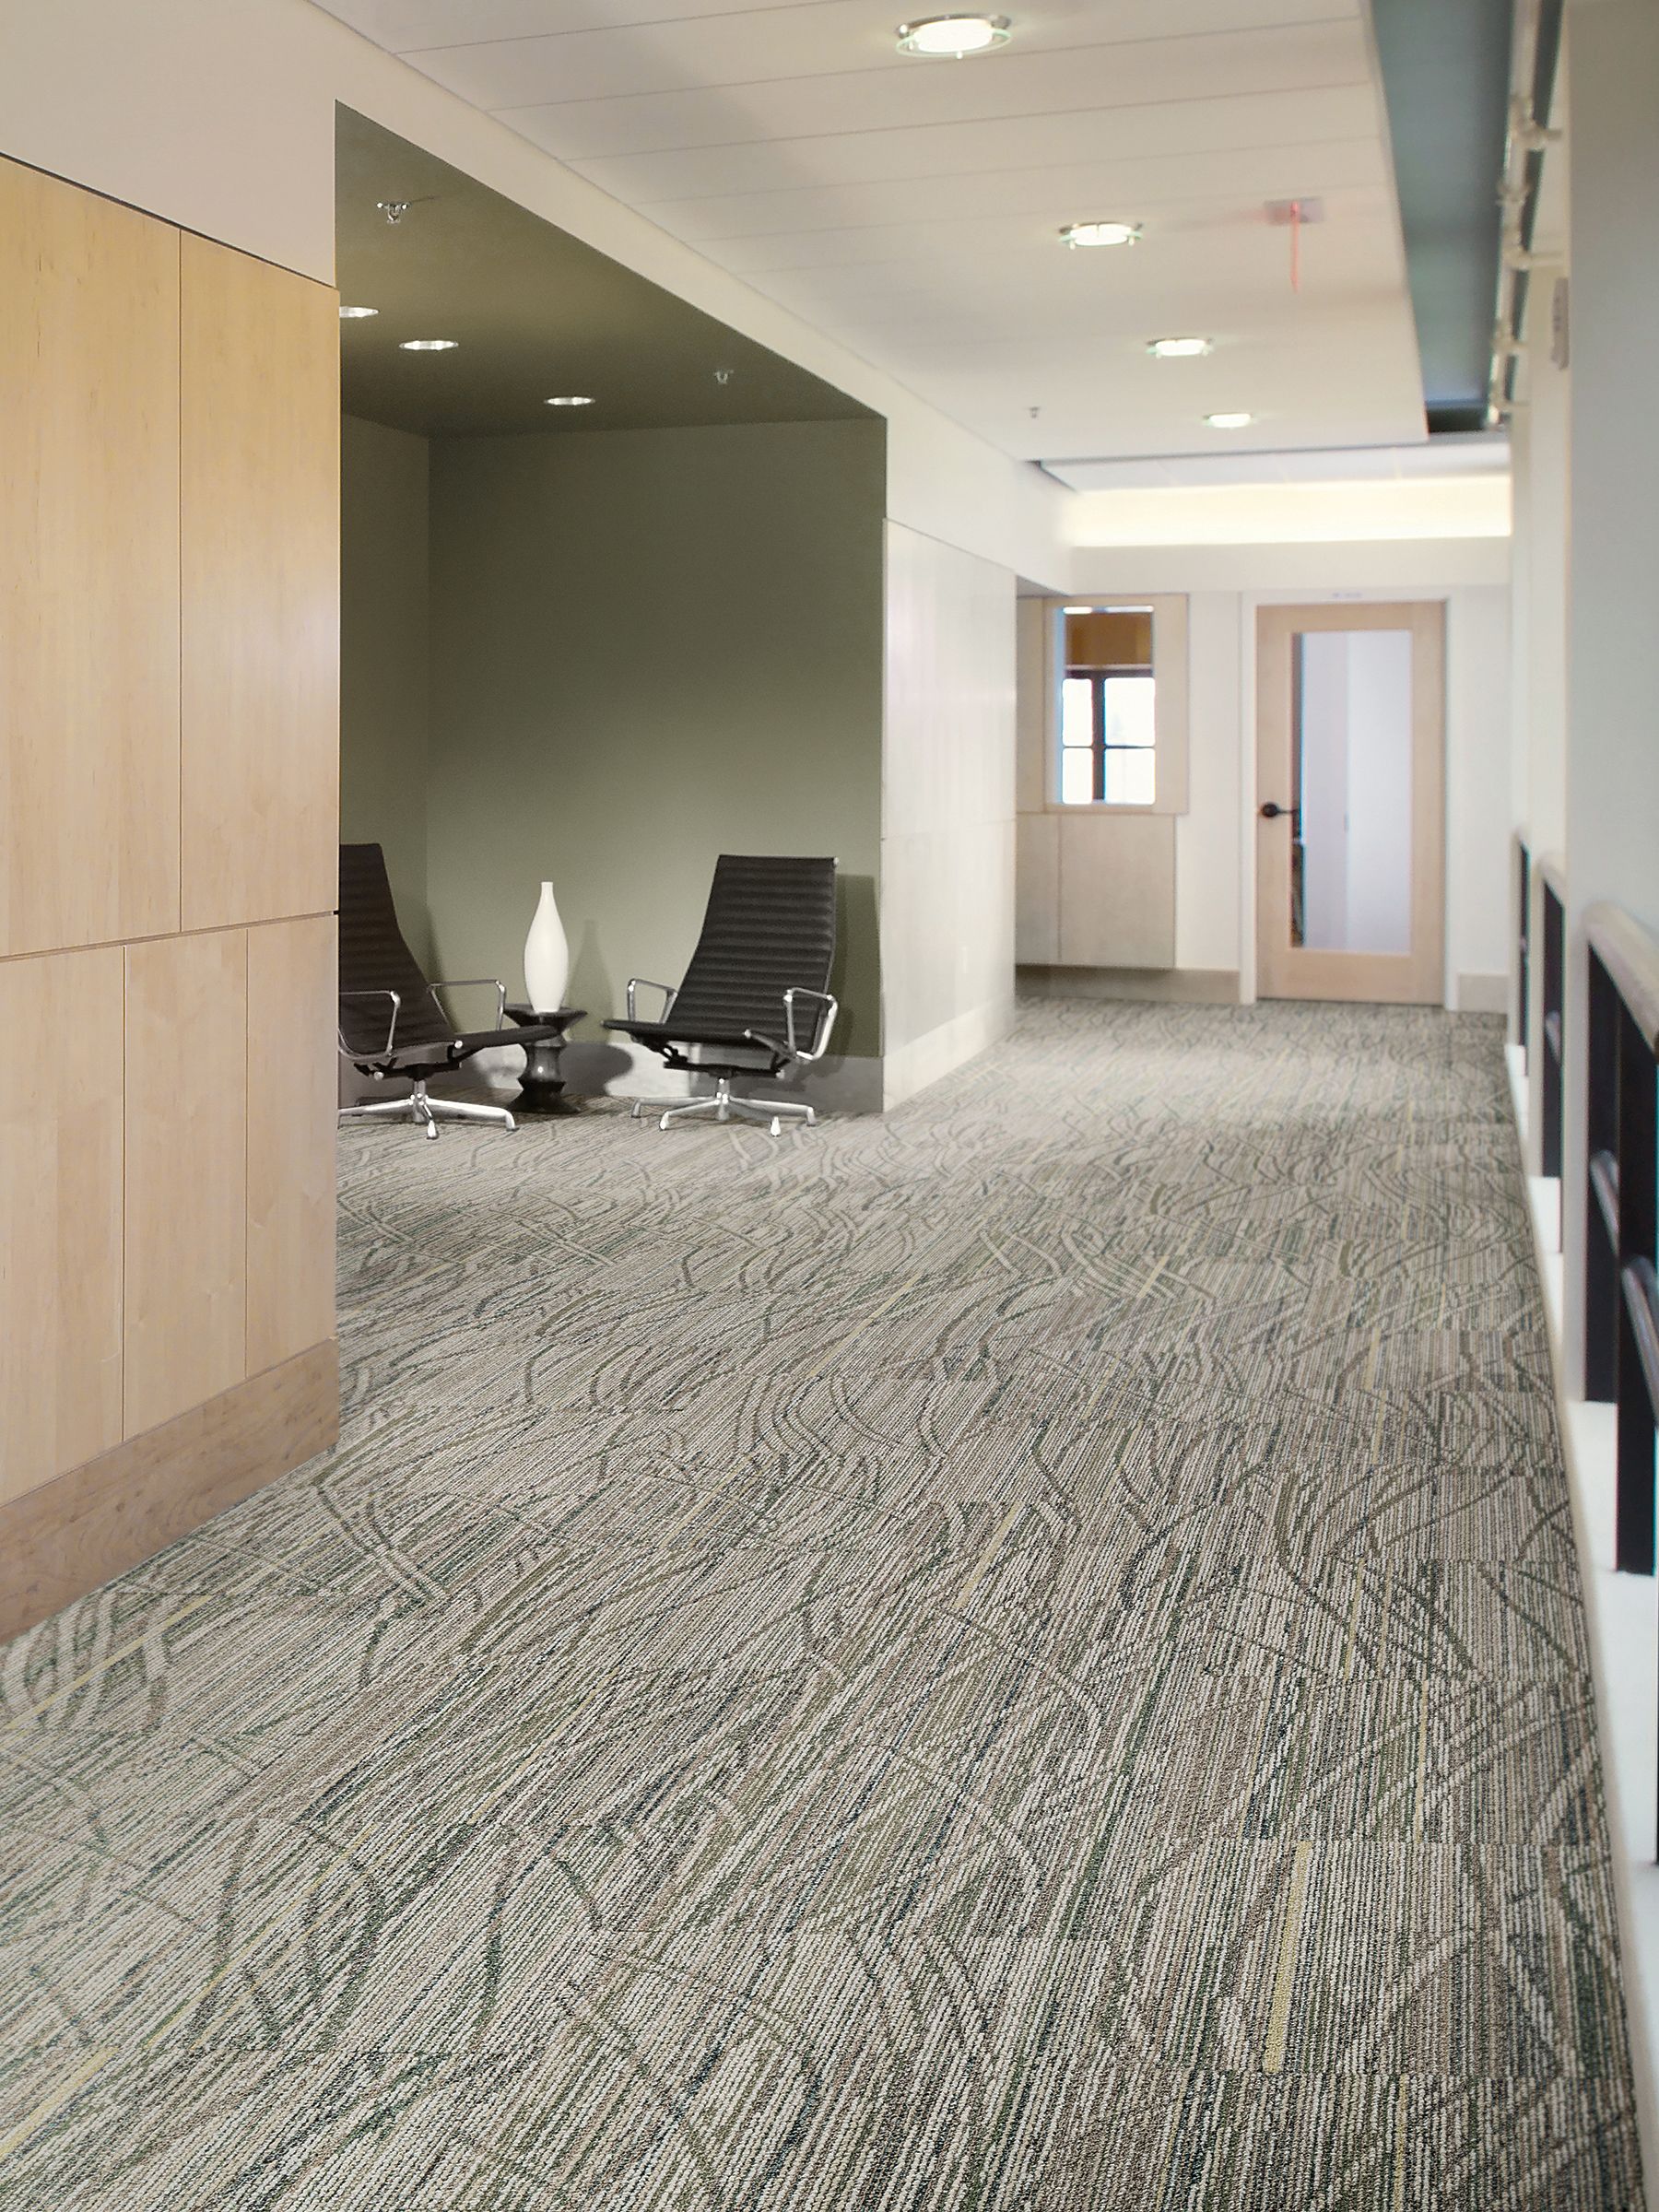 Interface Prairie Grass Loop carpet tile in corridor with seating area on side imagen número 8